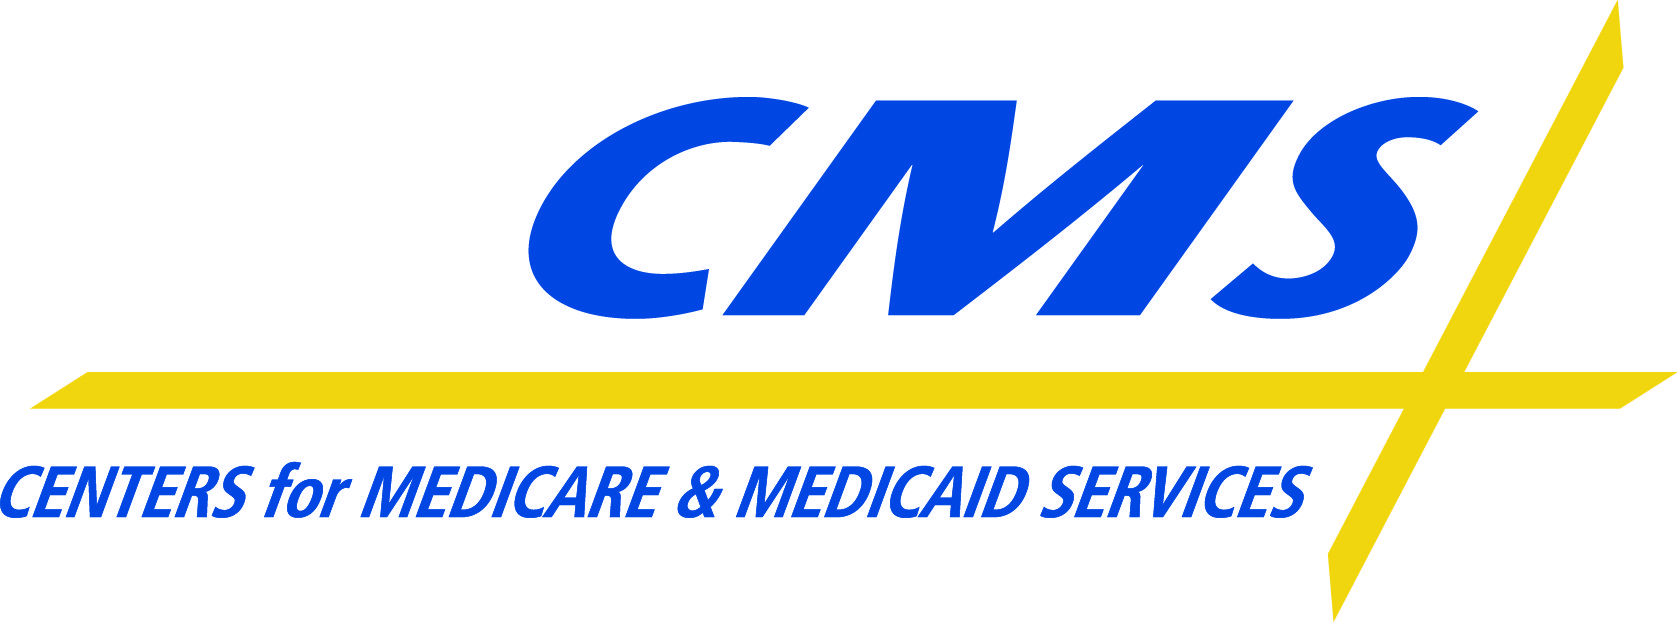 CMS adds open enrollment period, offers regulatory relief for payers ...